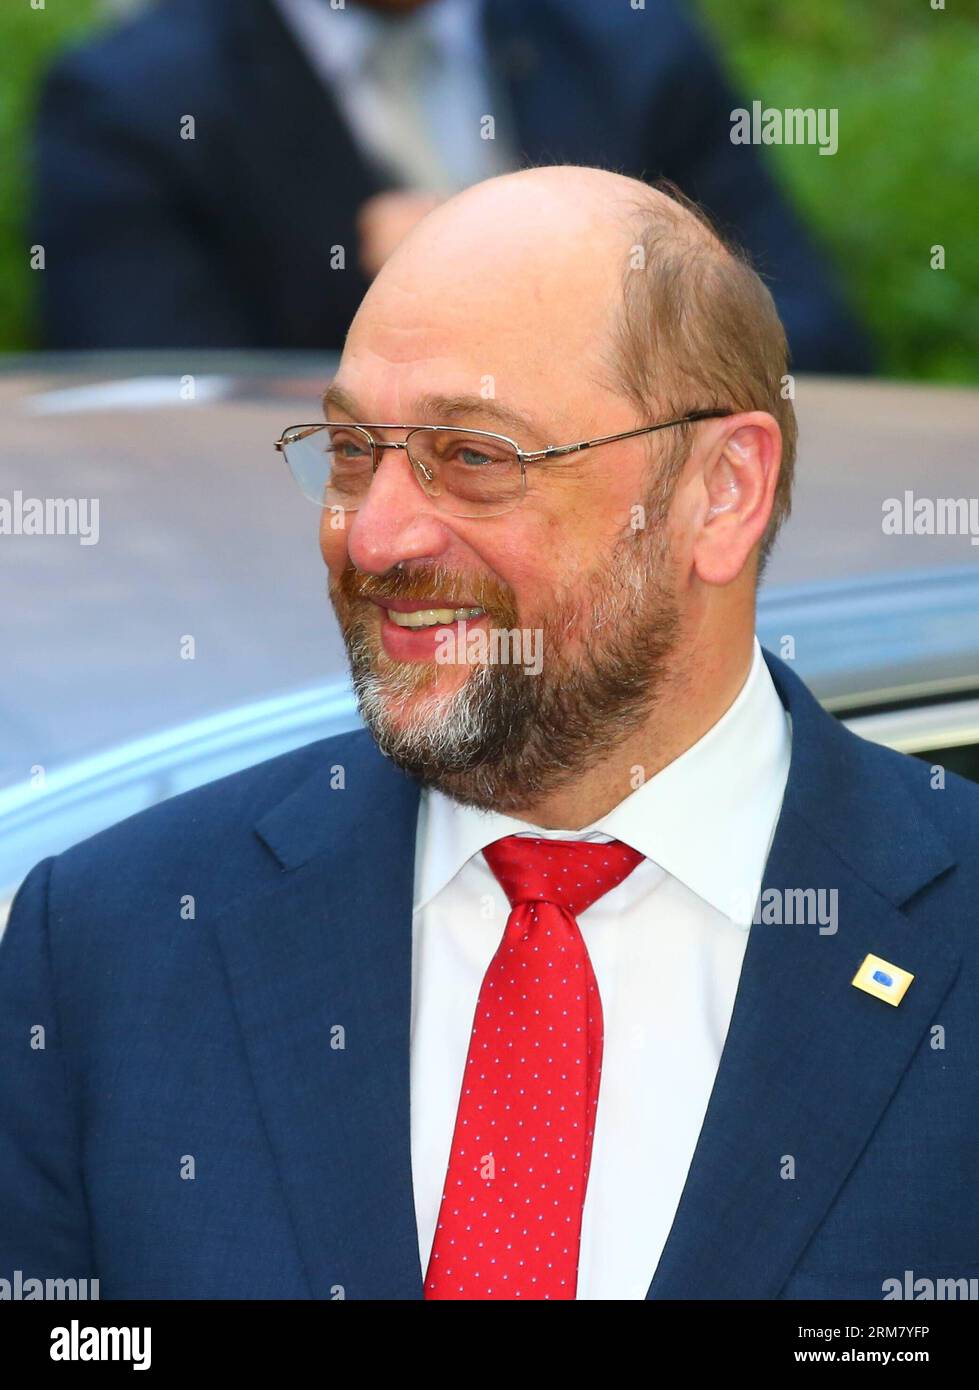 (140320) -- BRUSSELS, March 20, 2014 (Xinhua) -- President of European Parliament Martin Schulz arrives to attend the European Union (EU) Summit at the EU headquarters in Brussels, capital of Belgium, March 20, 2014. The EU spring summit will focus on industrial competitiveness, Ukraine and the bloc s energy strategy. (Xinhua/Gong Bing)(zl) BELGIUM-BRUSSELS-EU-SUMMIT-UKRAINE PUBLICATIONxNOTxINxCHN   Brussels March 20 2014 XINHUA President of European Parliament Martin Schulz arrives to attend The European Union EU Summit AT The EU Headquarters in Brussels Capital of Belgium March 20 2014 The E Stock Photo